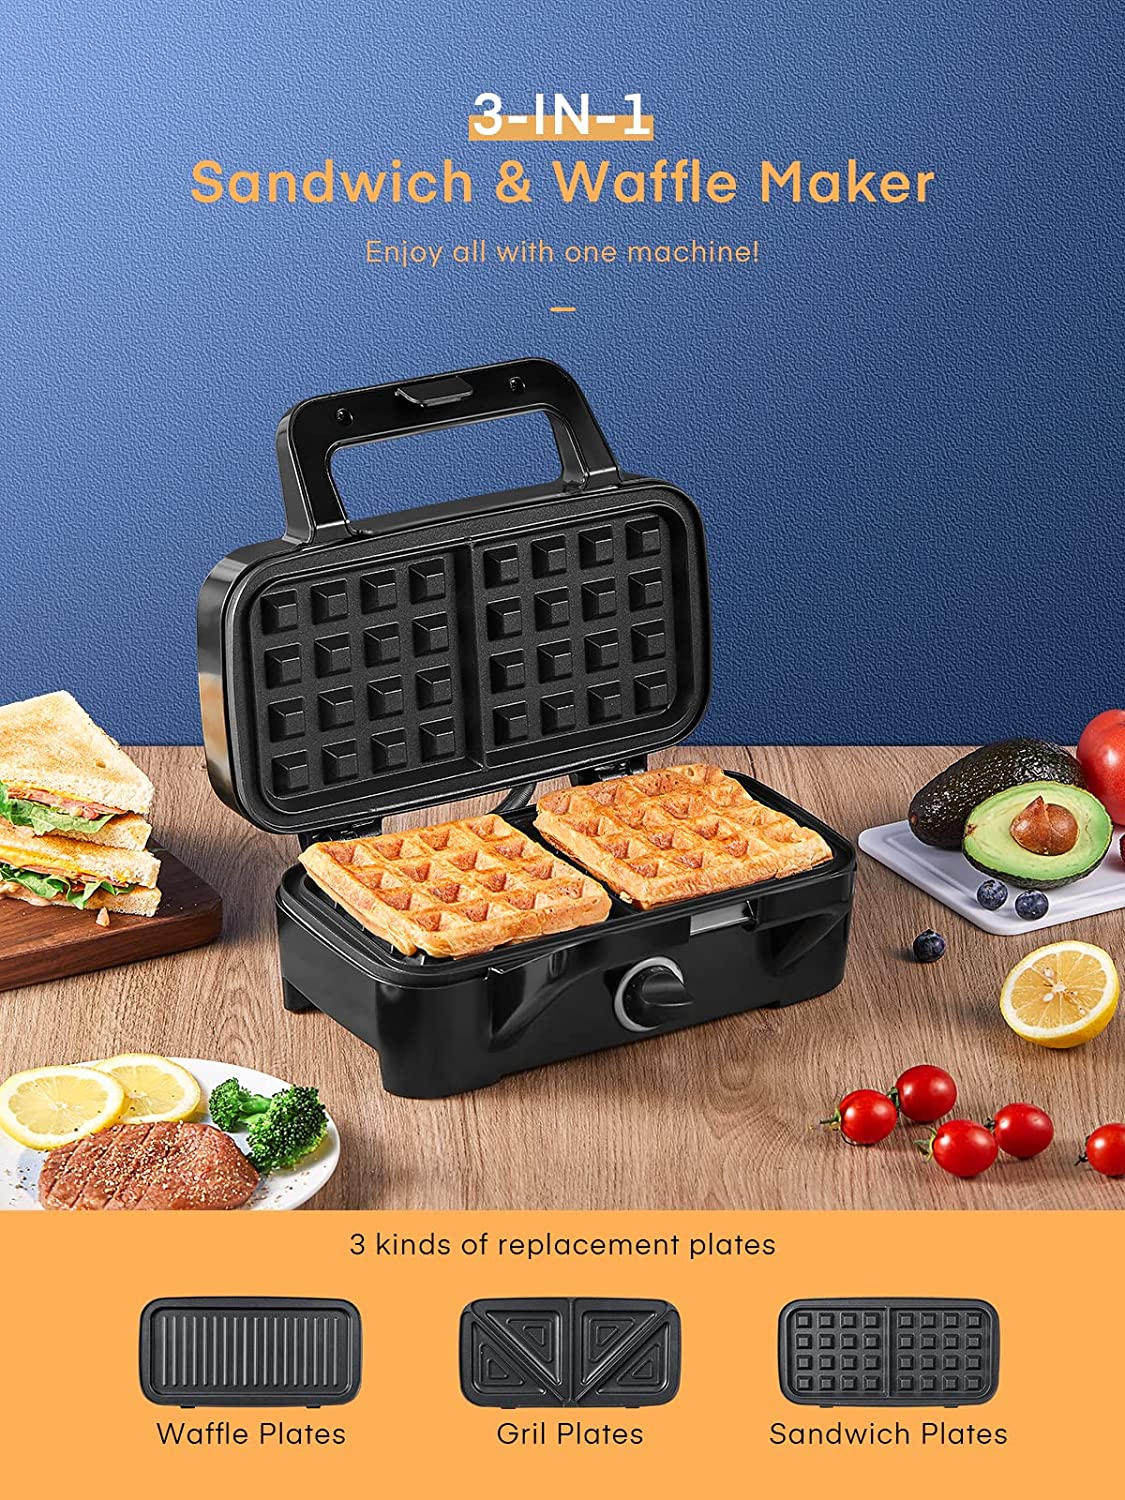 3 in 1 sandwich and waffle maker, HOUSNAT 3 in 1 Sandwich Maker, Waffle Maker with Removable Plates, 1200W Panini Press with Interchangeable Non-Stick Plates, Indicator Lights, 5-gear Temperature Control, Silver/Black